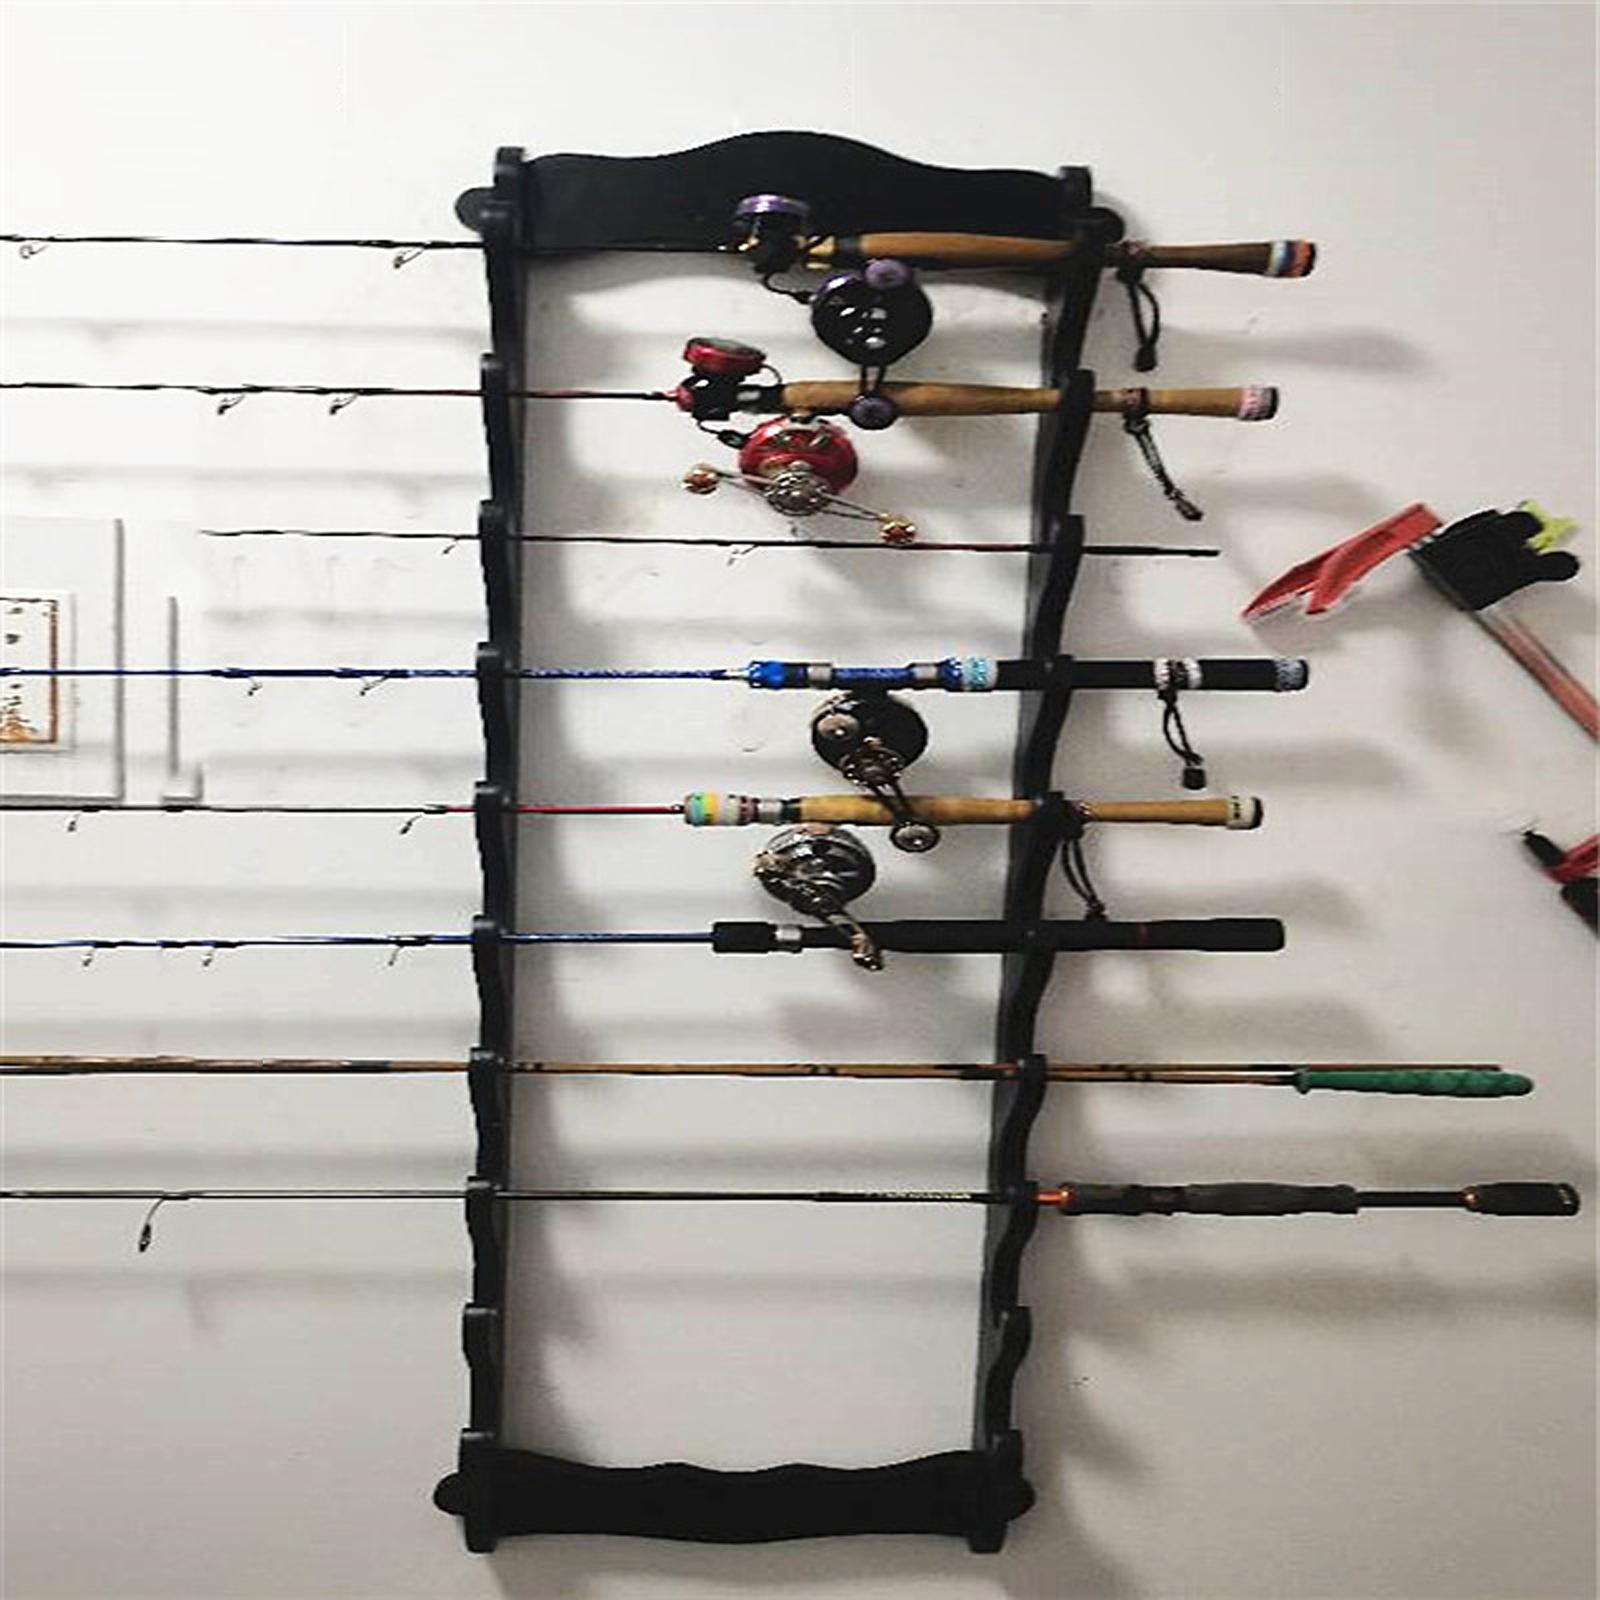 Horizontal Wall Mount Fishing Rod Rack Holds 8 Fishing Rods for Shop Cabin Garage , Home